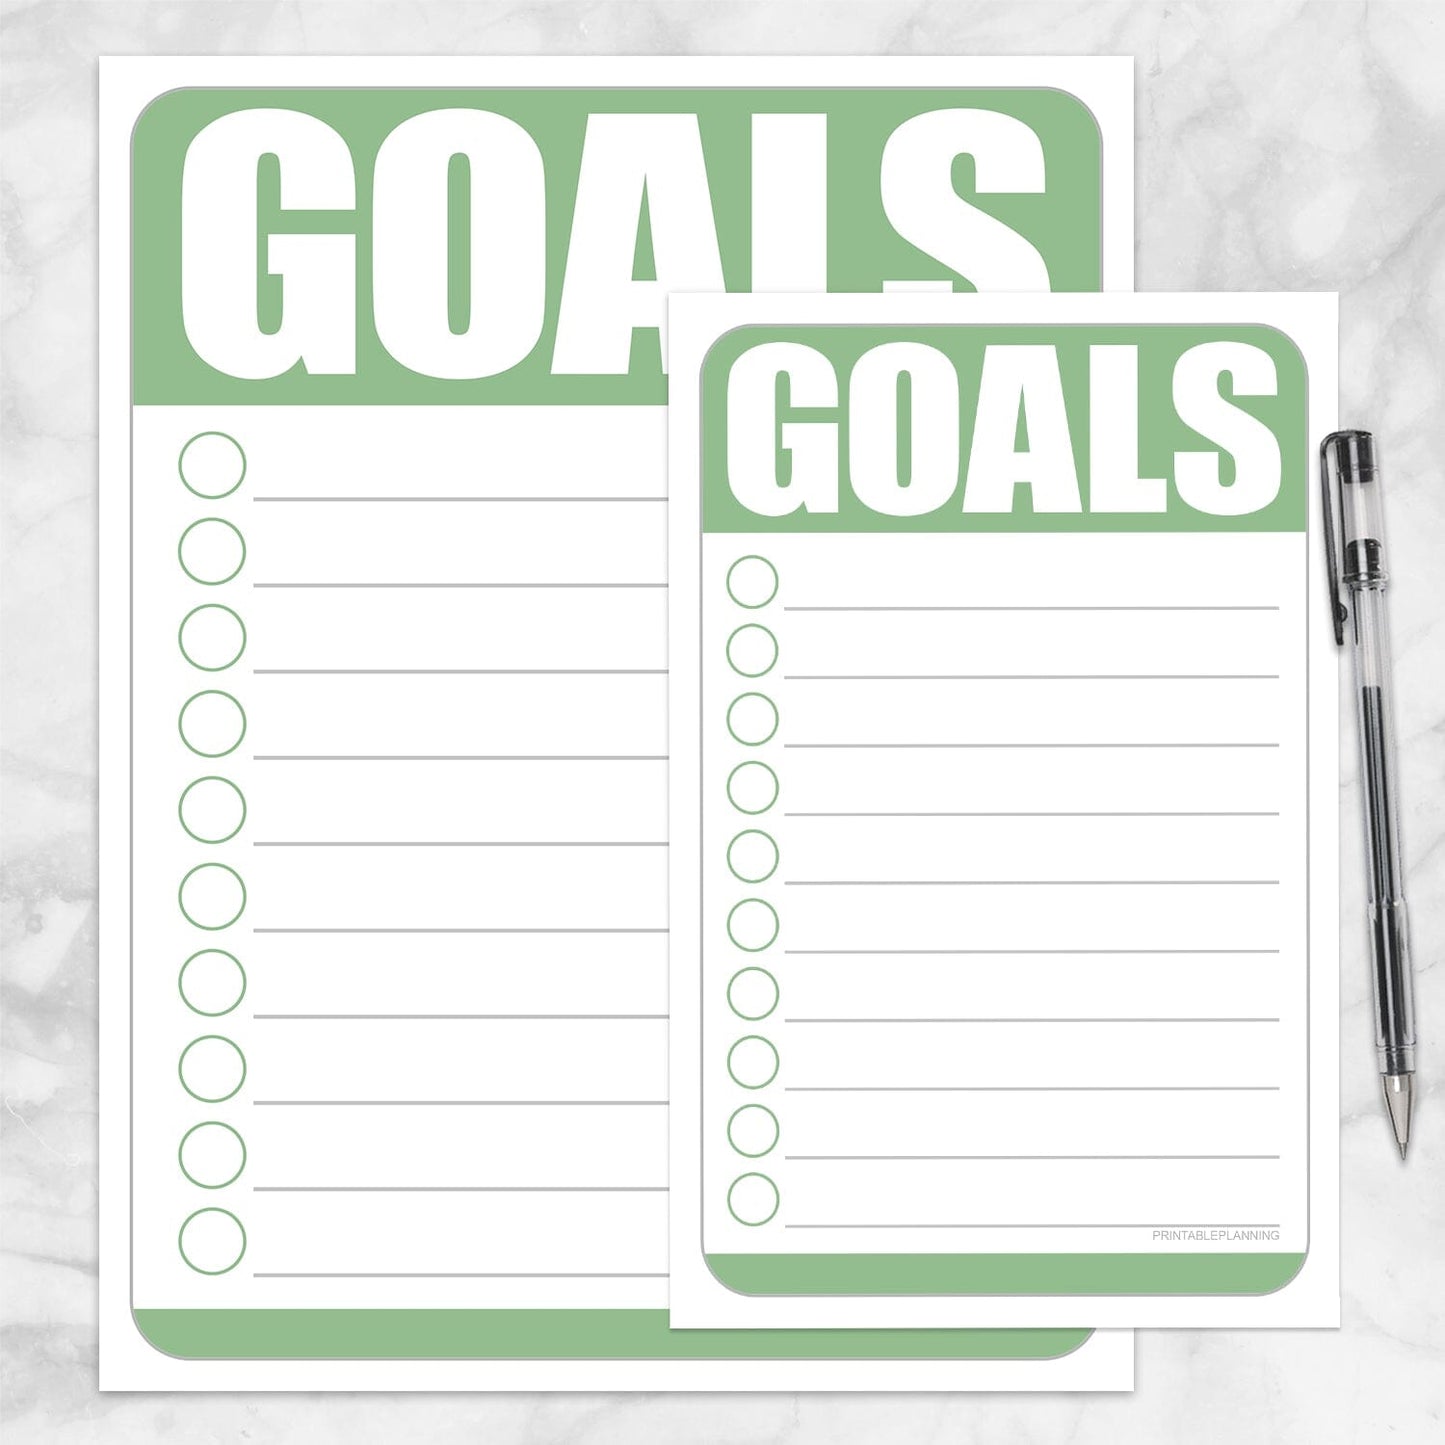 Printable Goals - Green Full Page and Half Page Checklists at Printable Planning.